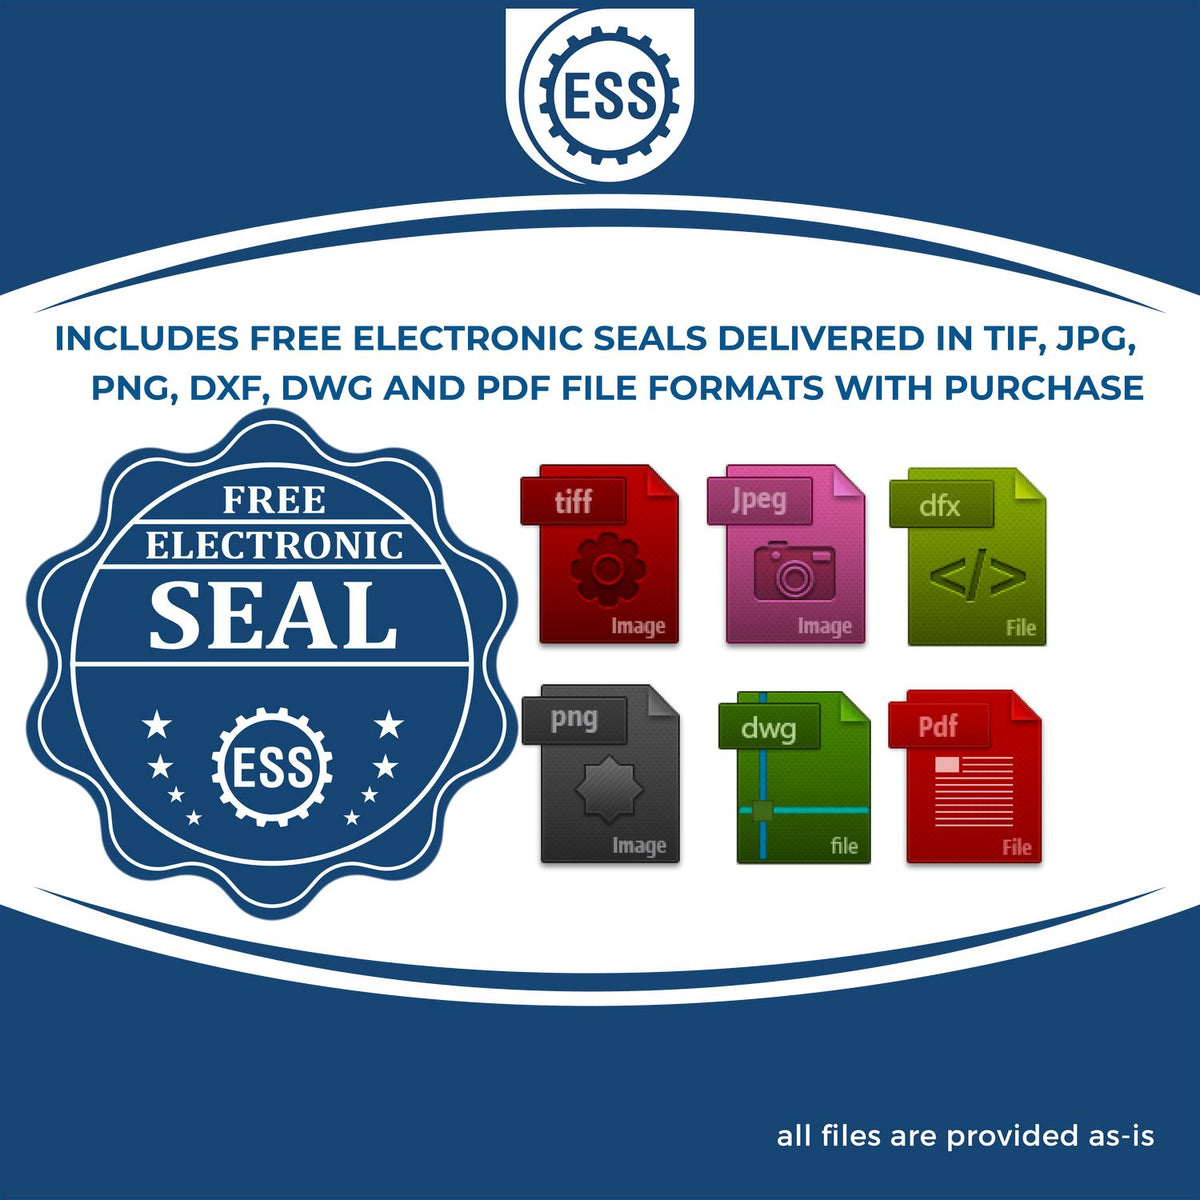 An infographic for the free electronic seal for the Pennsylvania Professional Engineer Seal Stamp illustrating the different file type icons such as DXF, DWG, TIF, JPG and PNG.